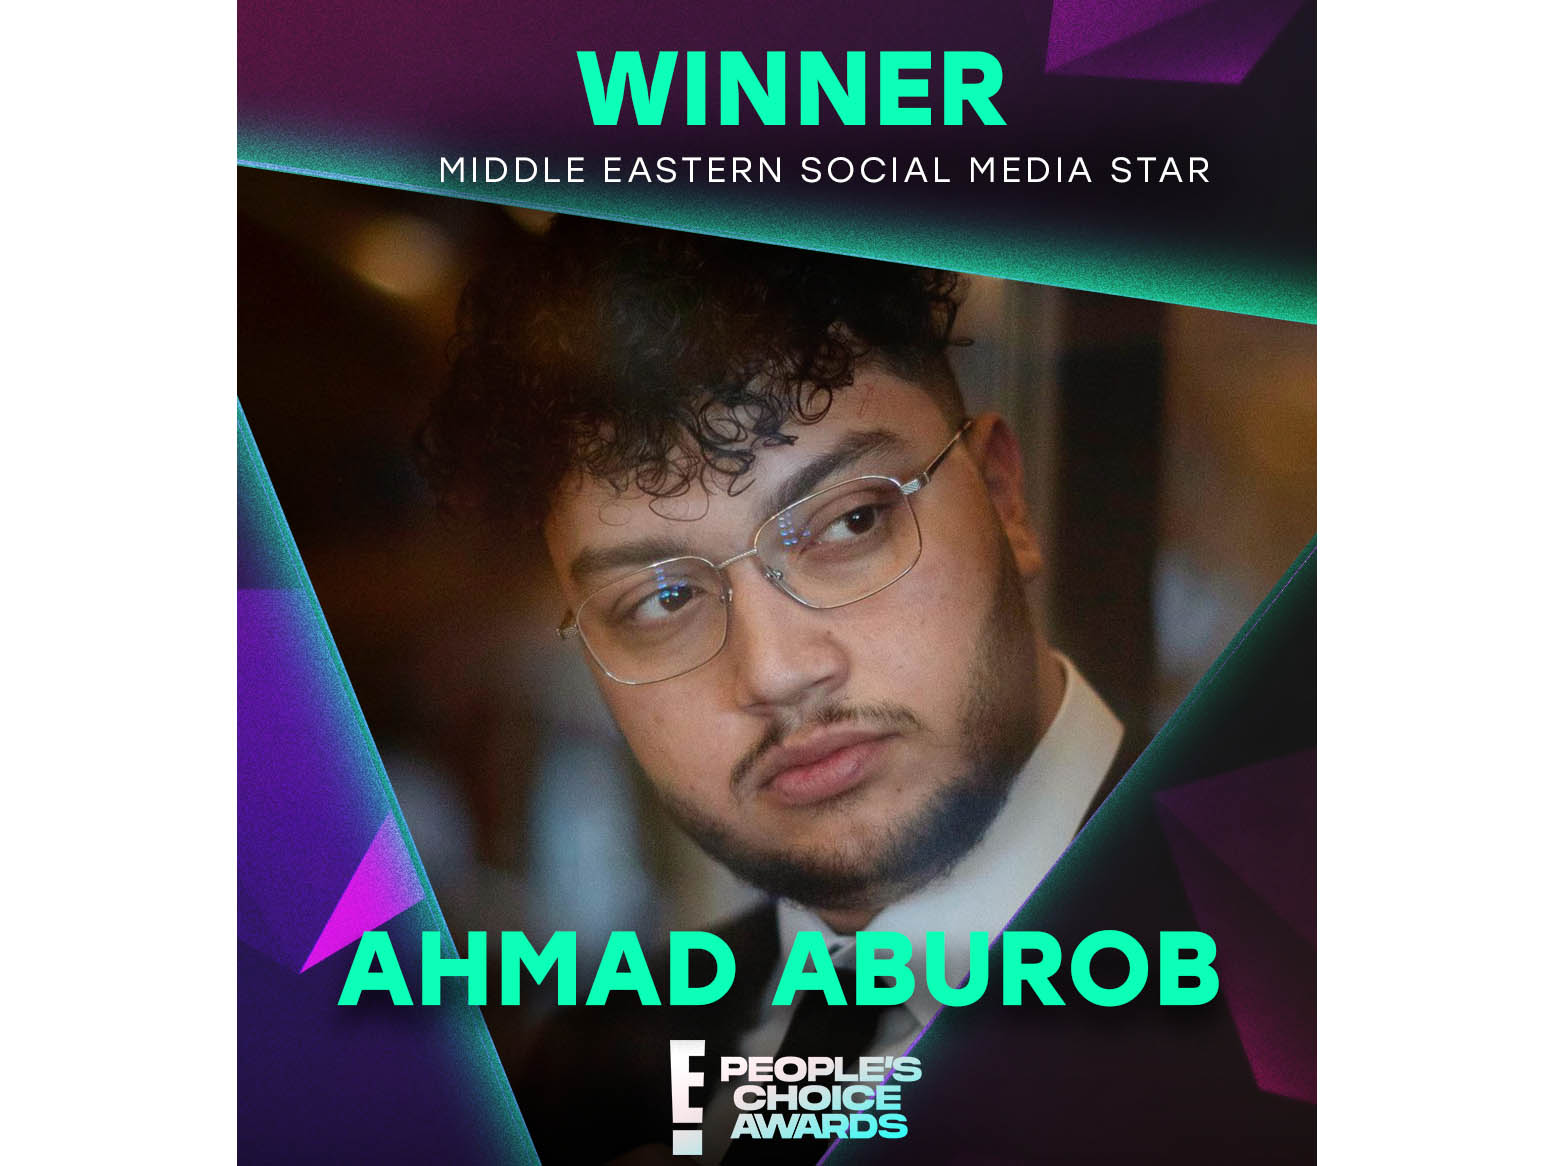 Jordanian YouTuber Ahmad Aburob crowned 'Middle Eastern Social Media Star’ at the 2022 People’s Choice Awards